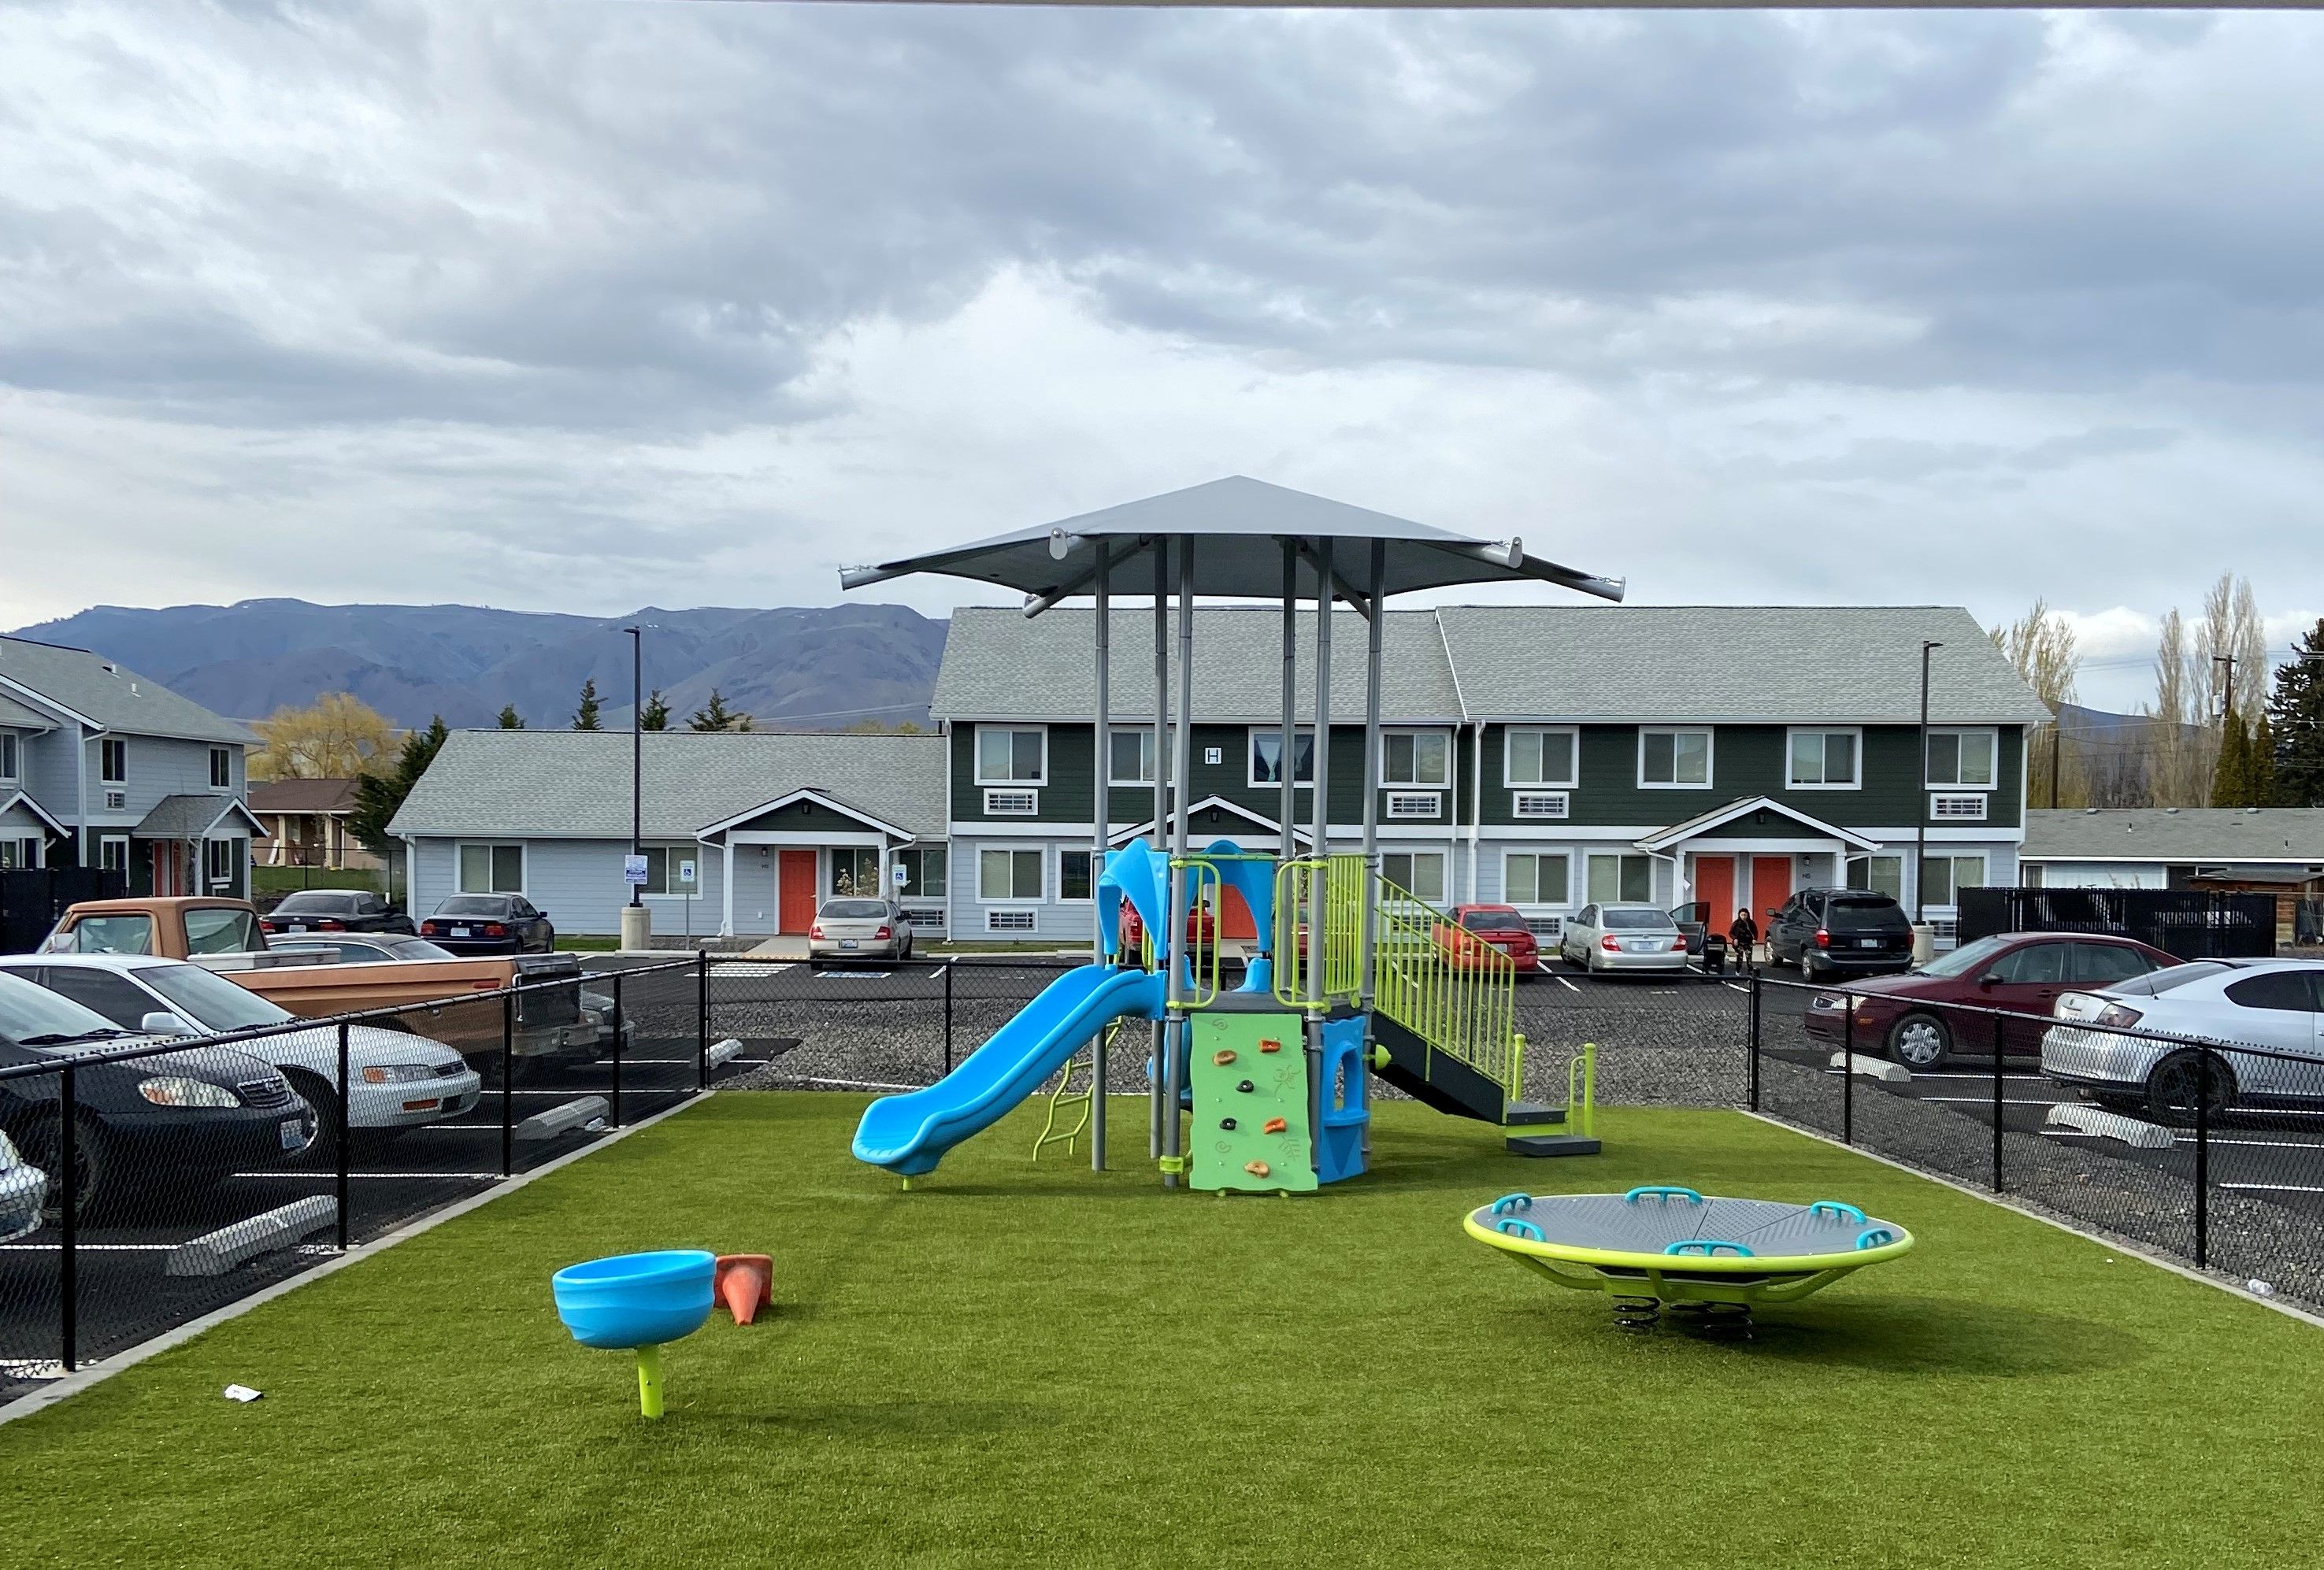 Colorful playground surrounded by rental units with mountains in the distance